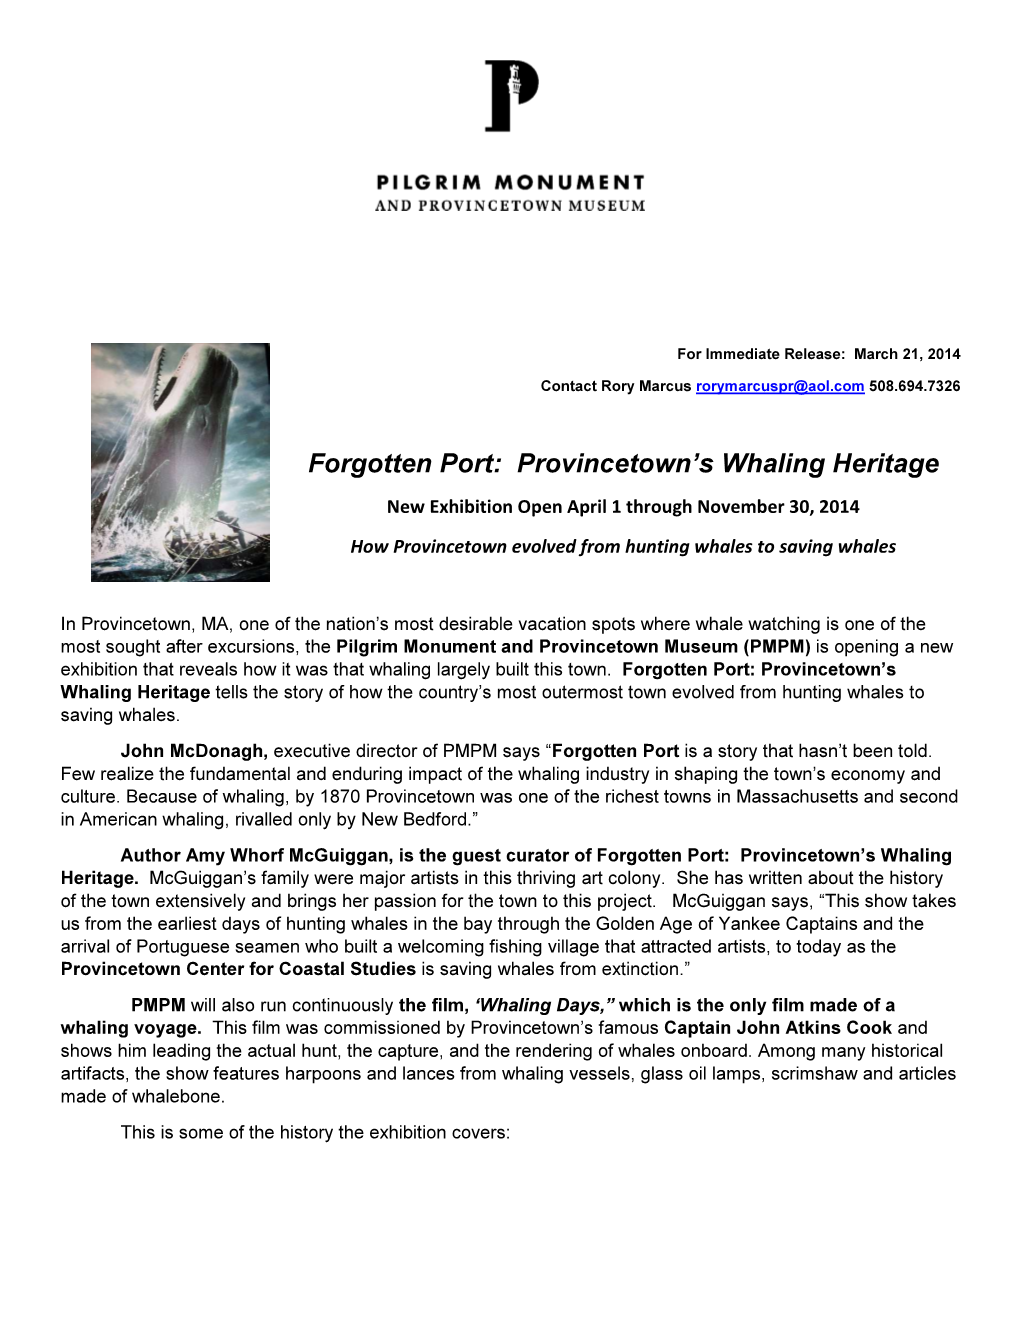 Provincetown's Whaling Heritage